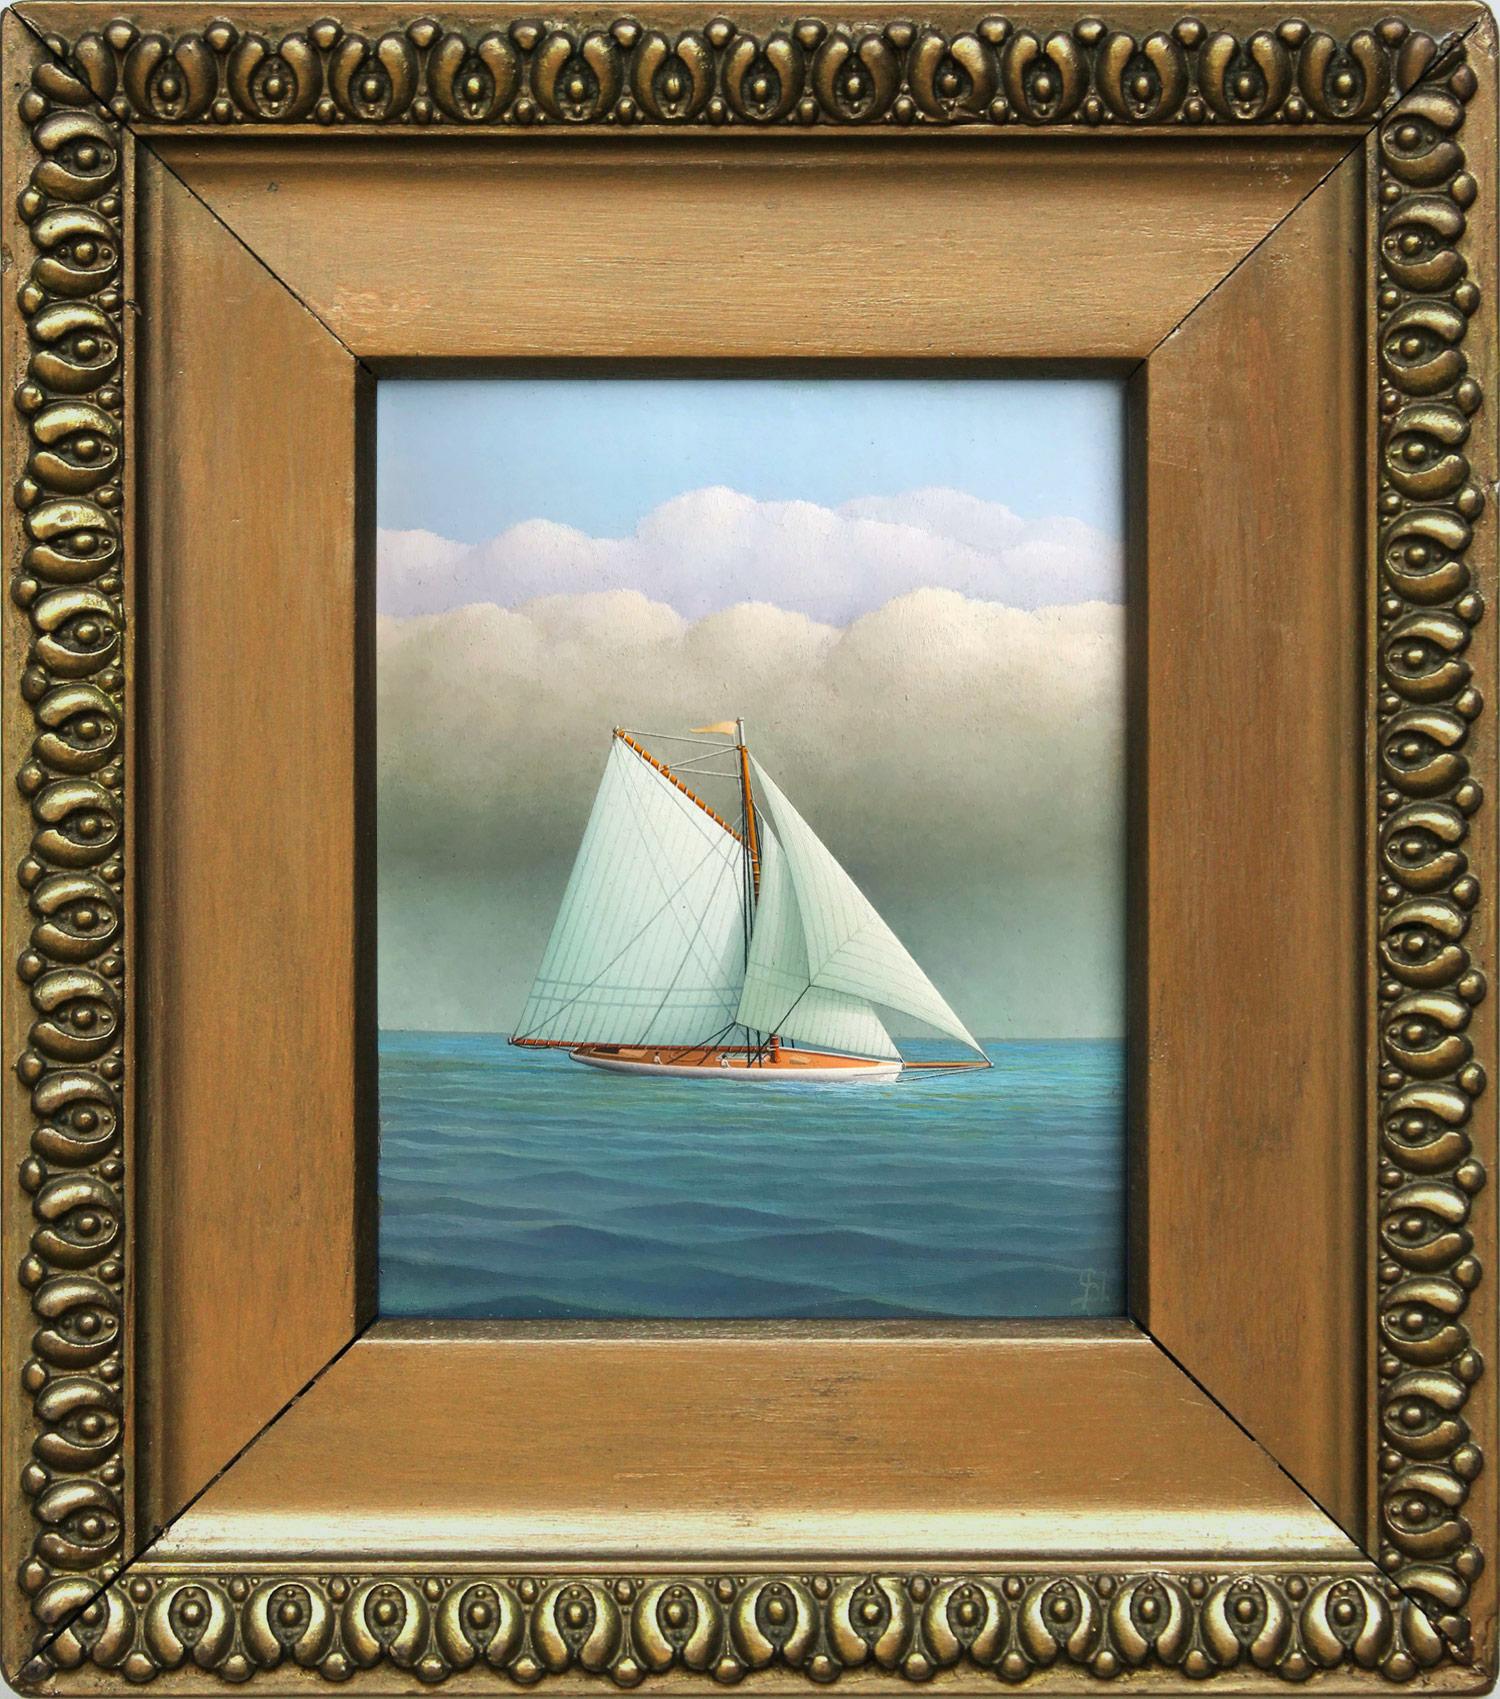 George Nemethy Figurative Painting - "Sailing Towards Clear Skies" Realist Sailboat Oil Painting on Canvas Board